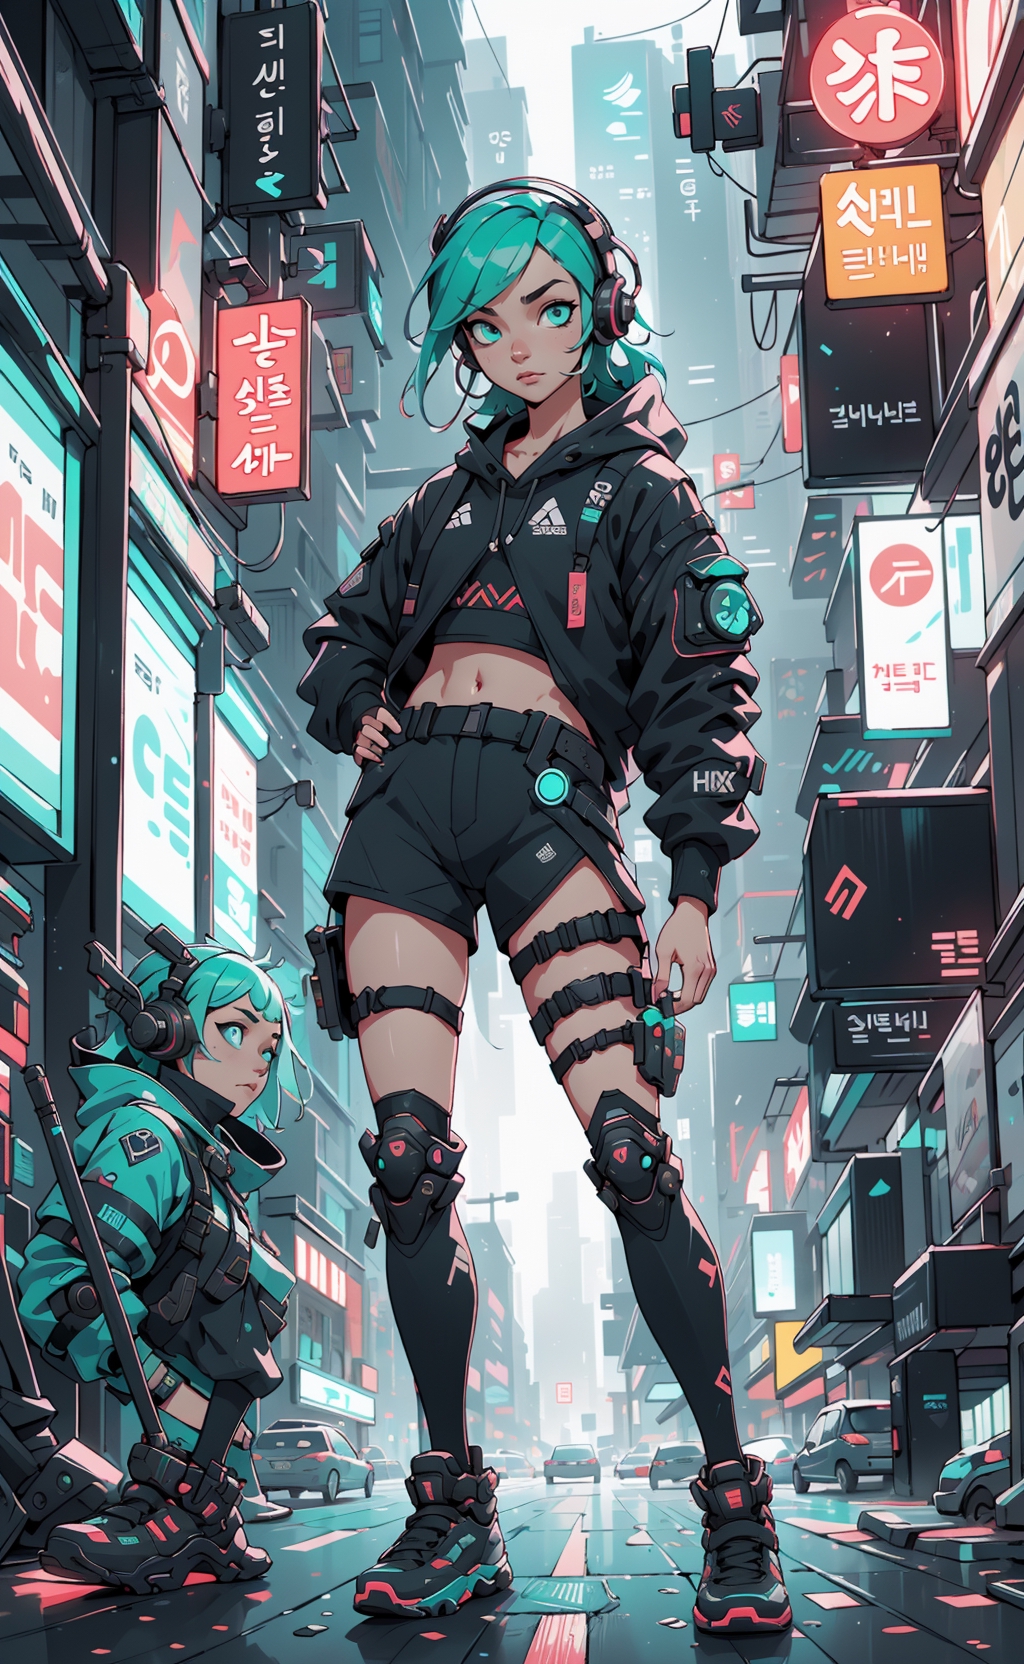 Custom I Will draw cyberpunk anime character with Tech wear Art Commission  | Sketchmob